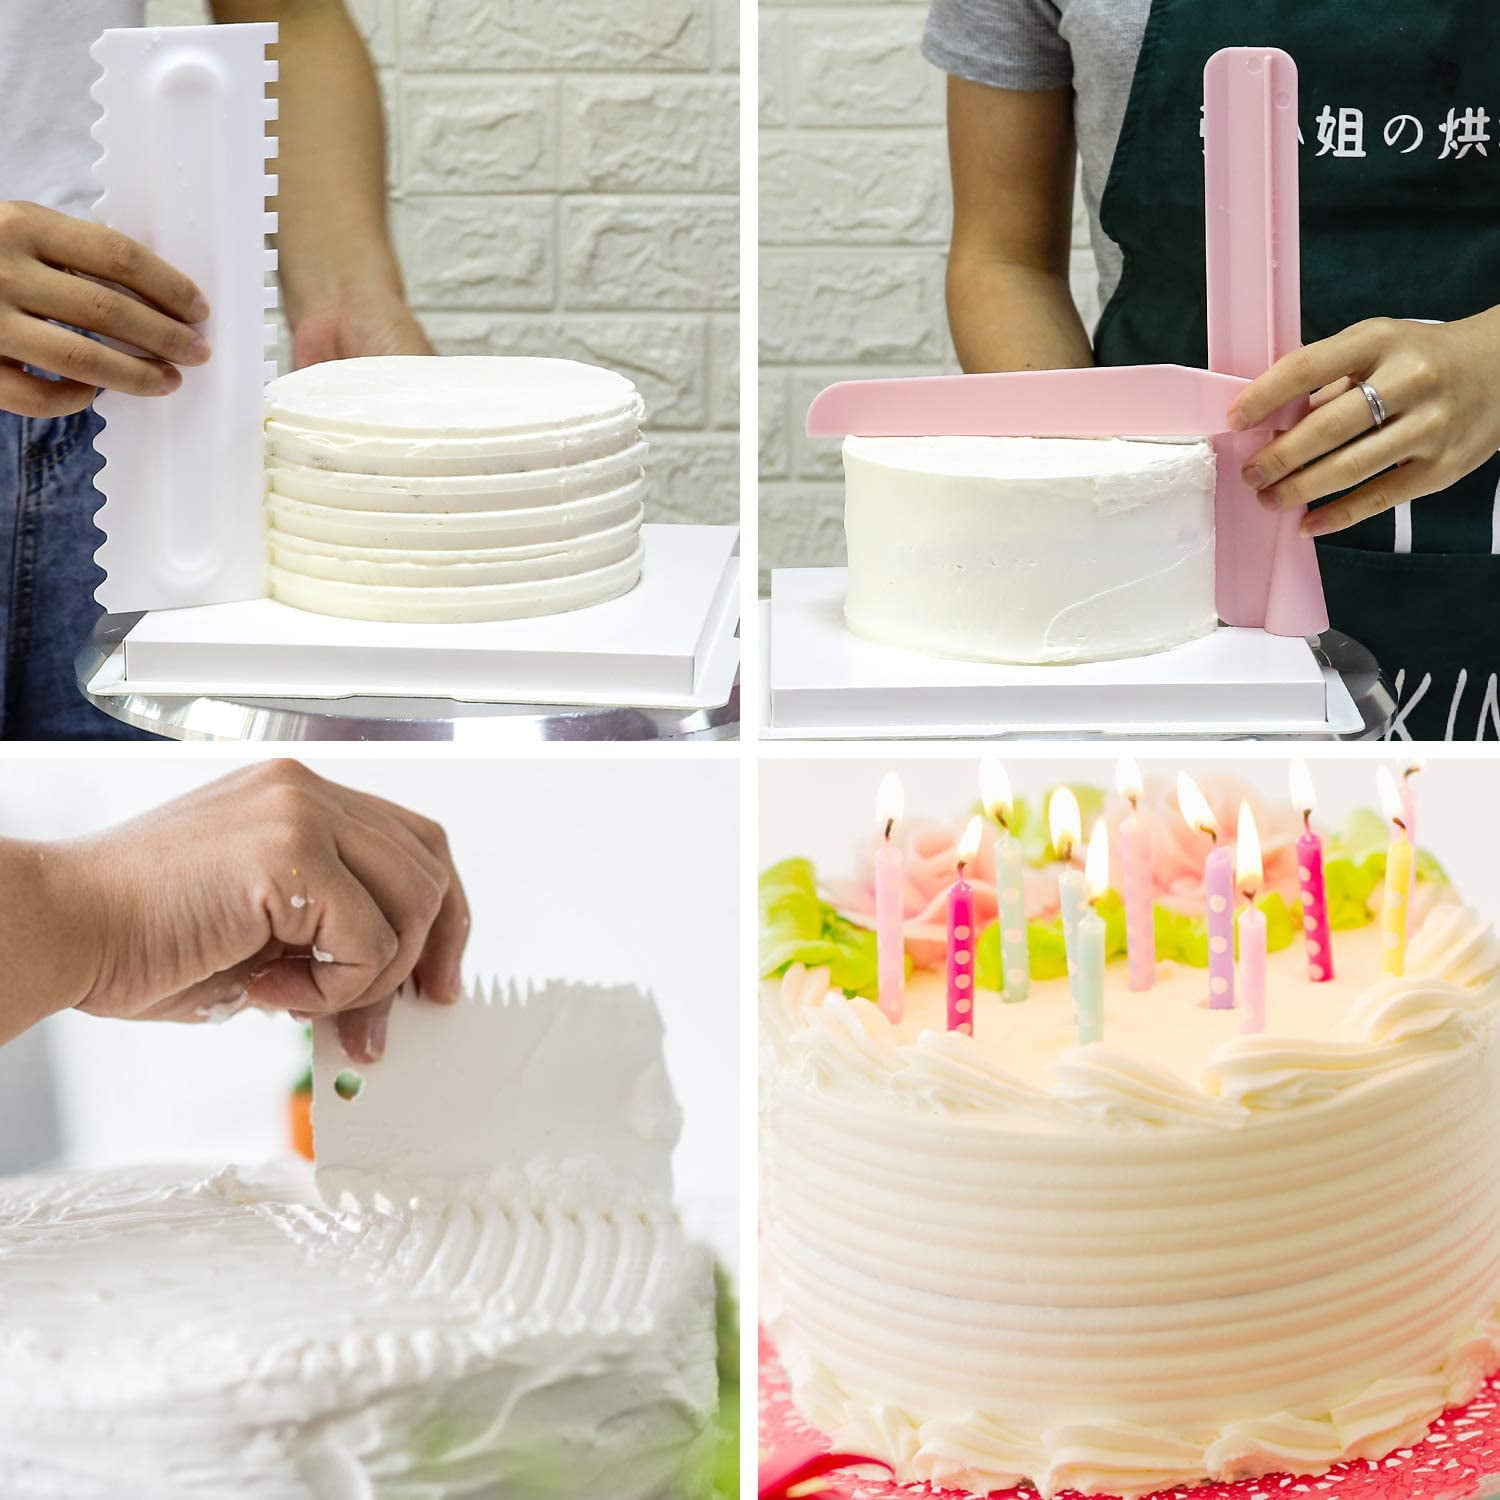 Bleteleh Large 10-inch Stainless Steel Cake Decorating Comb and Icing  smoother with Polypropylene Handle - Walmart.com